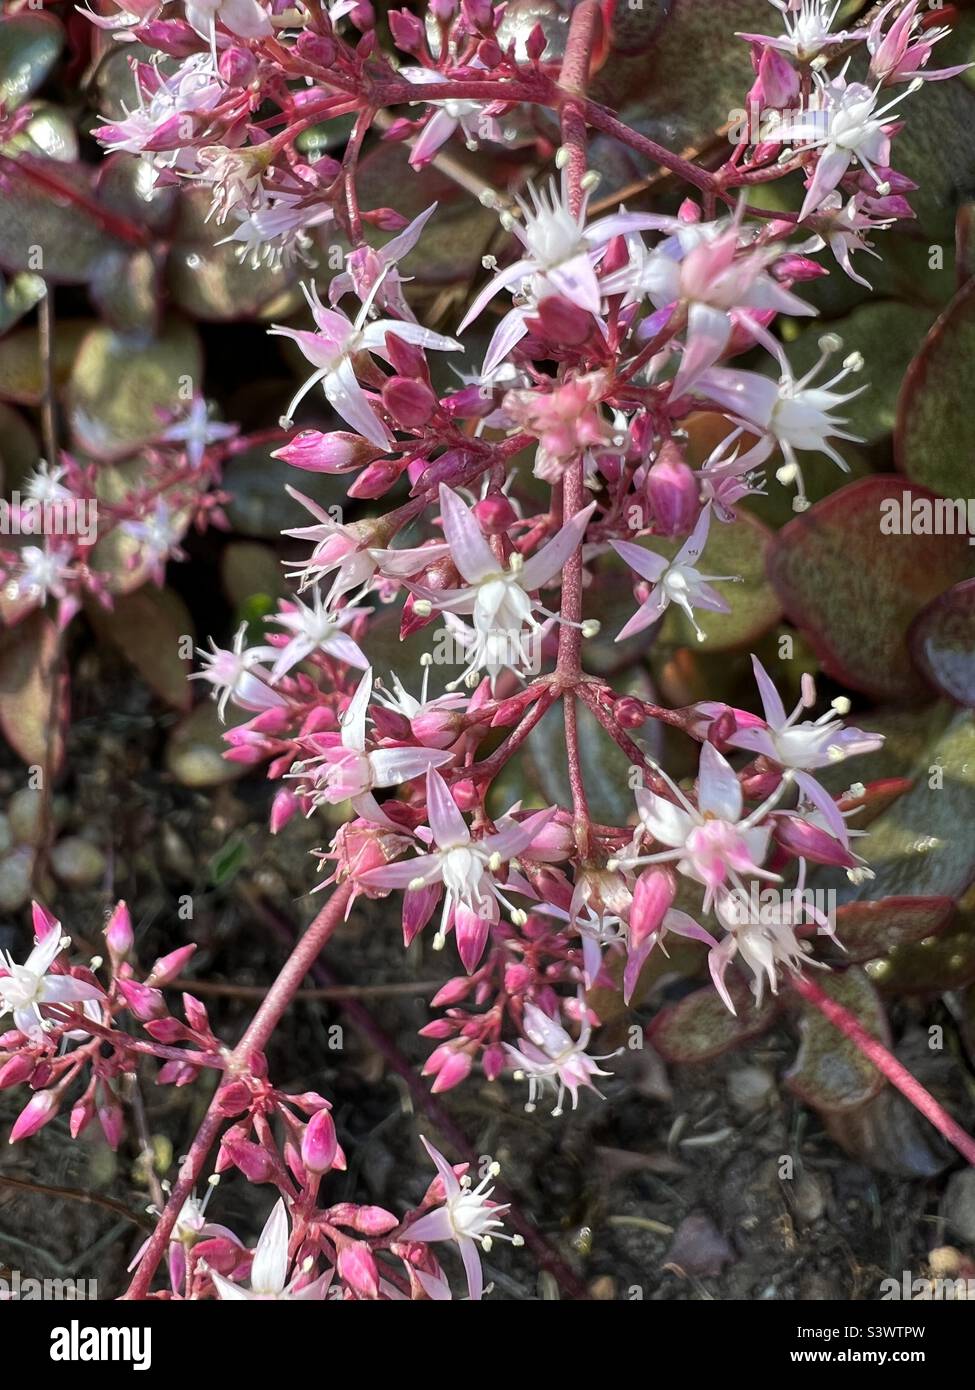 Fairy Crassula pretty, delicate pink and white flowers on succulent plant close-up Stock Photo